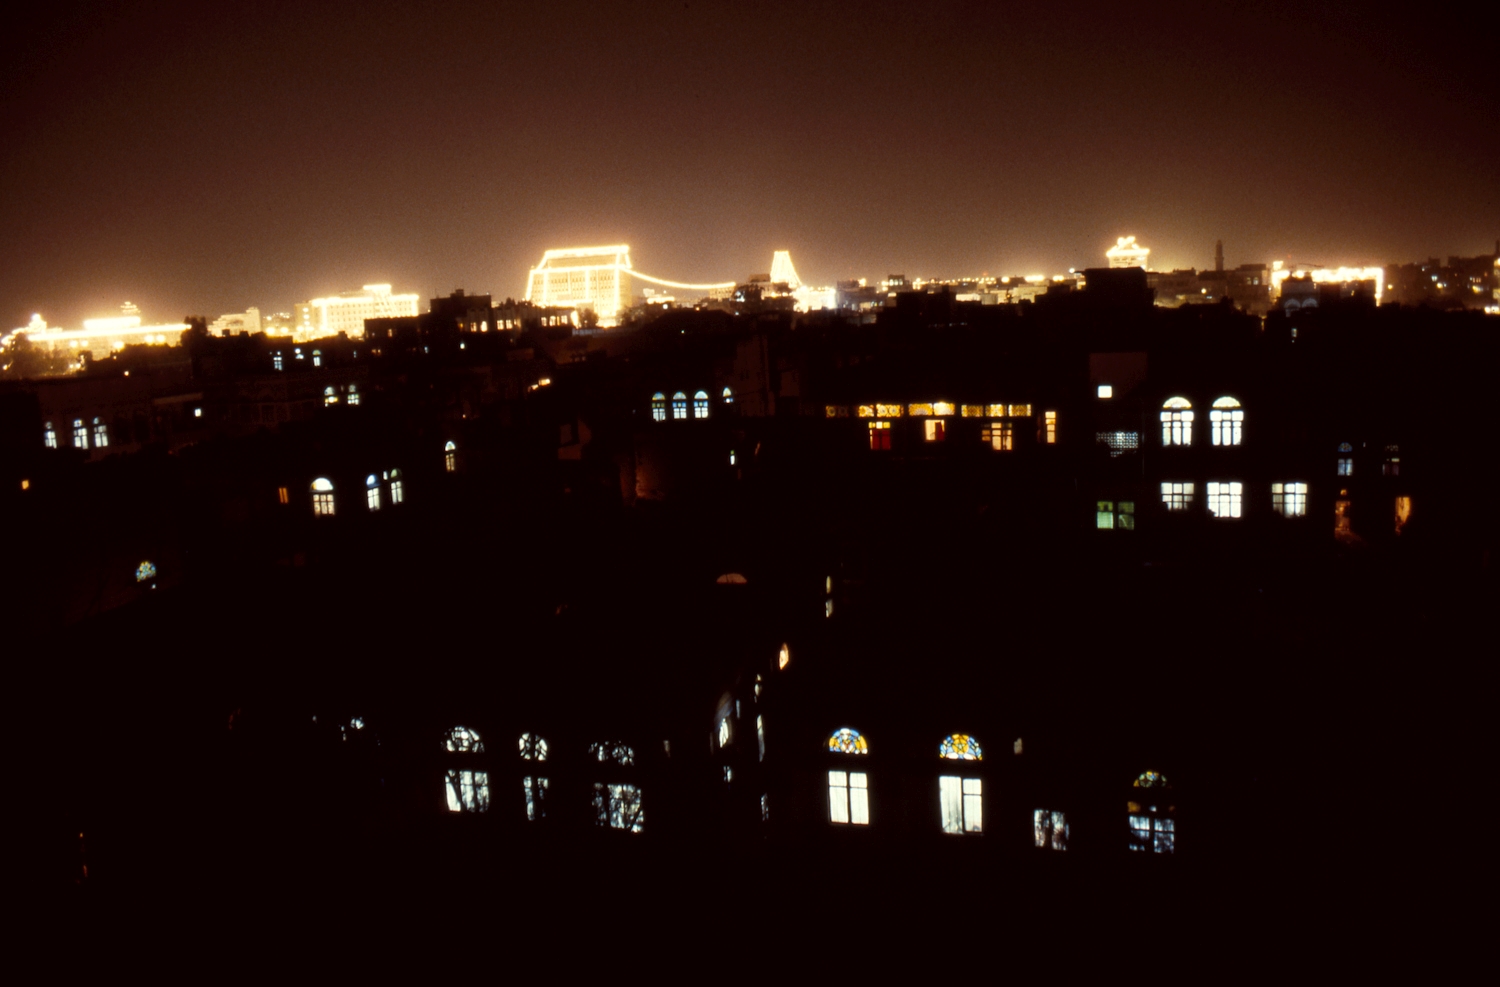 Sana'a. General views. View of city celebration during a national holiday, with buildings illuminated. 